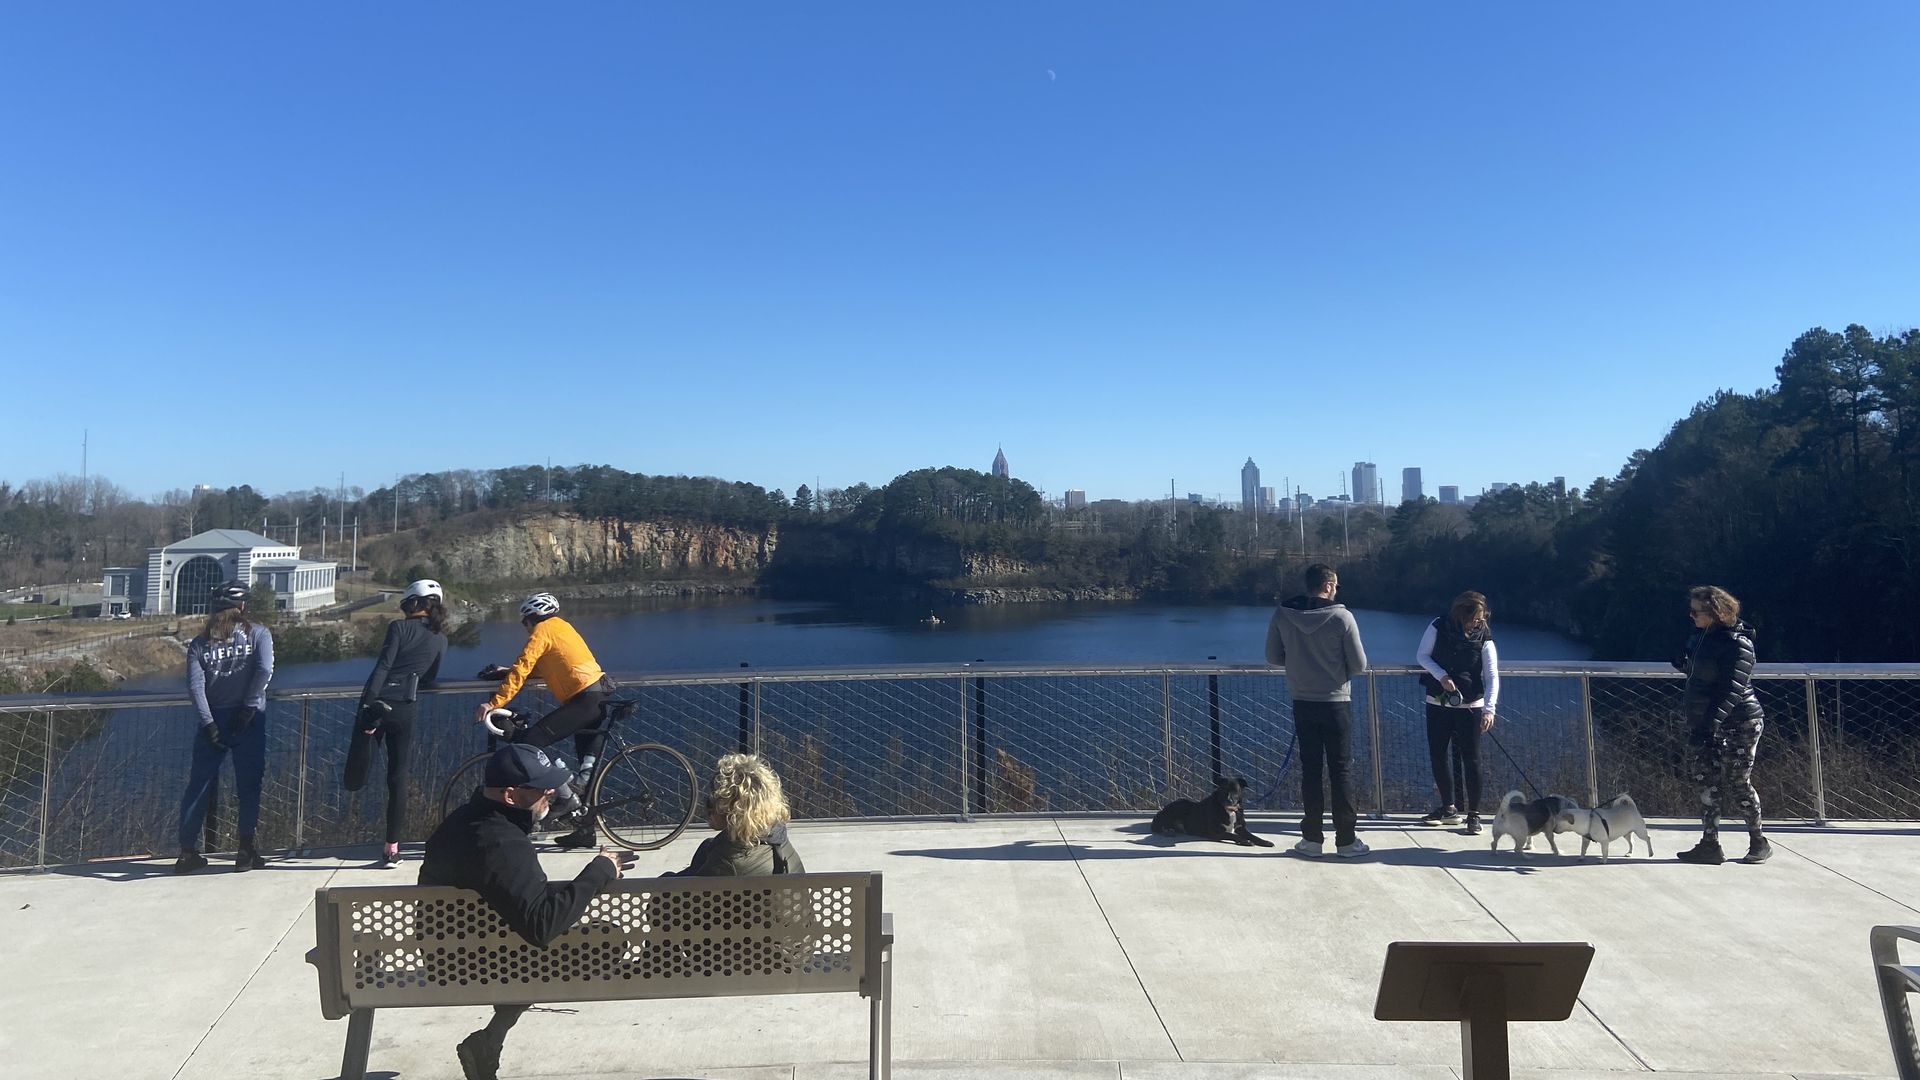 A group of bicyclists and walkers stand along a fence overlooking a reservoir made from a quarry with the city skyline in the background